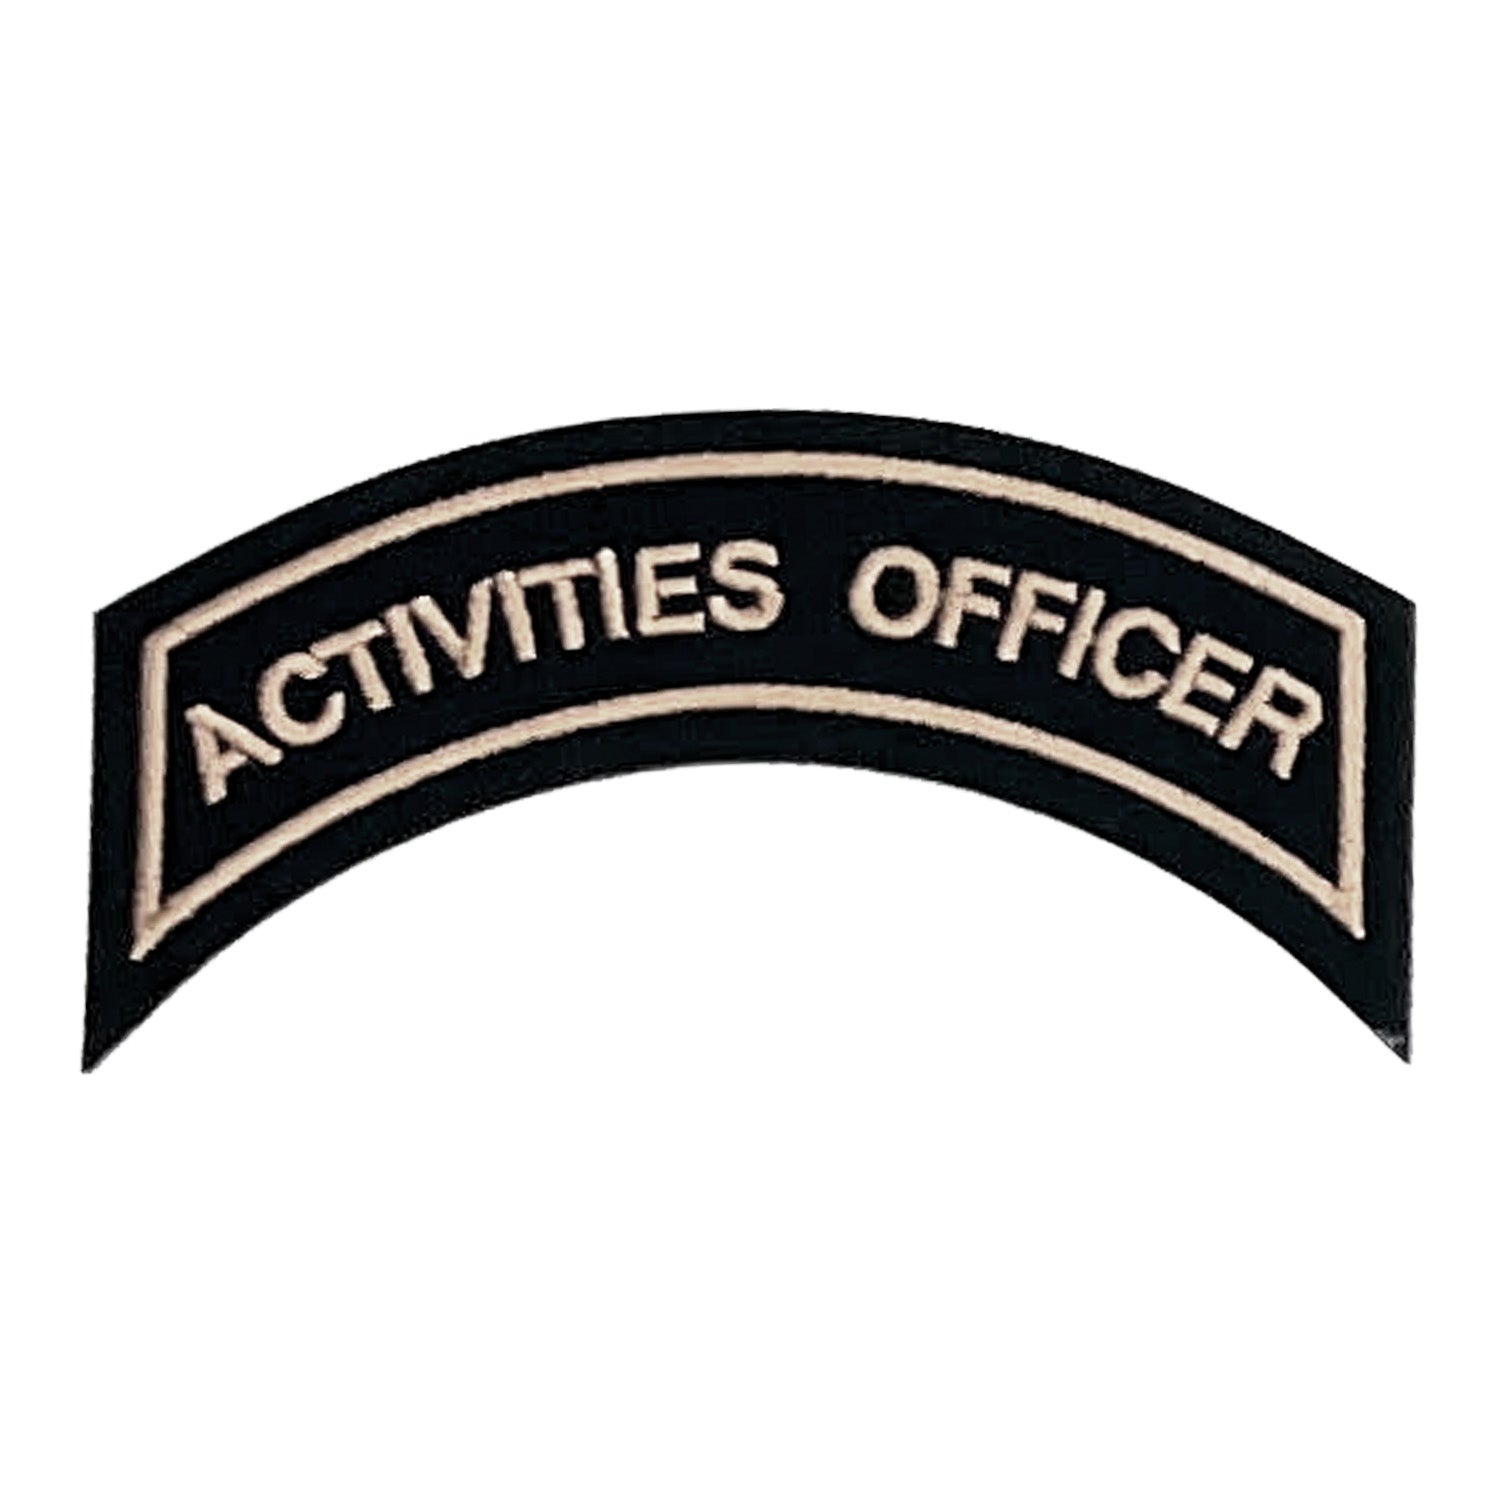 ACTIVITIES OFFICER Patch In Tan